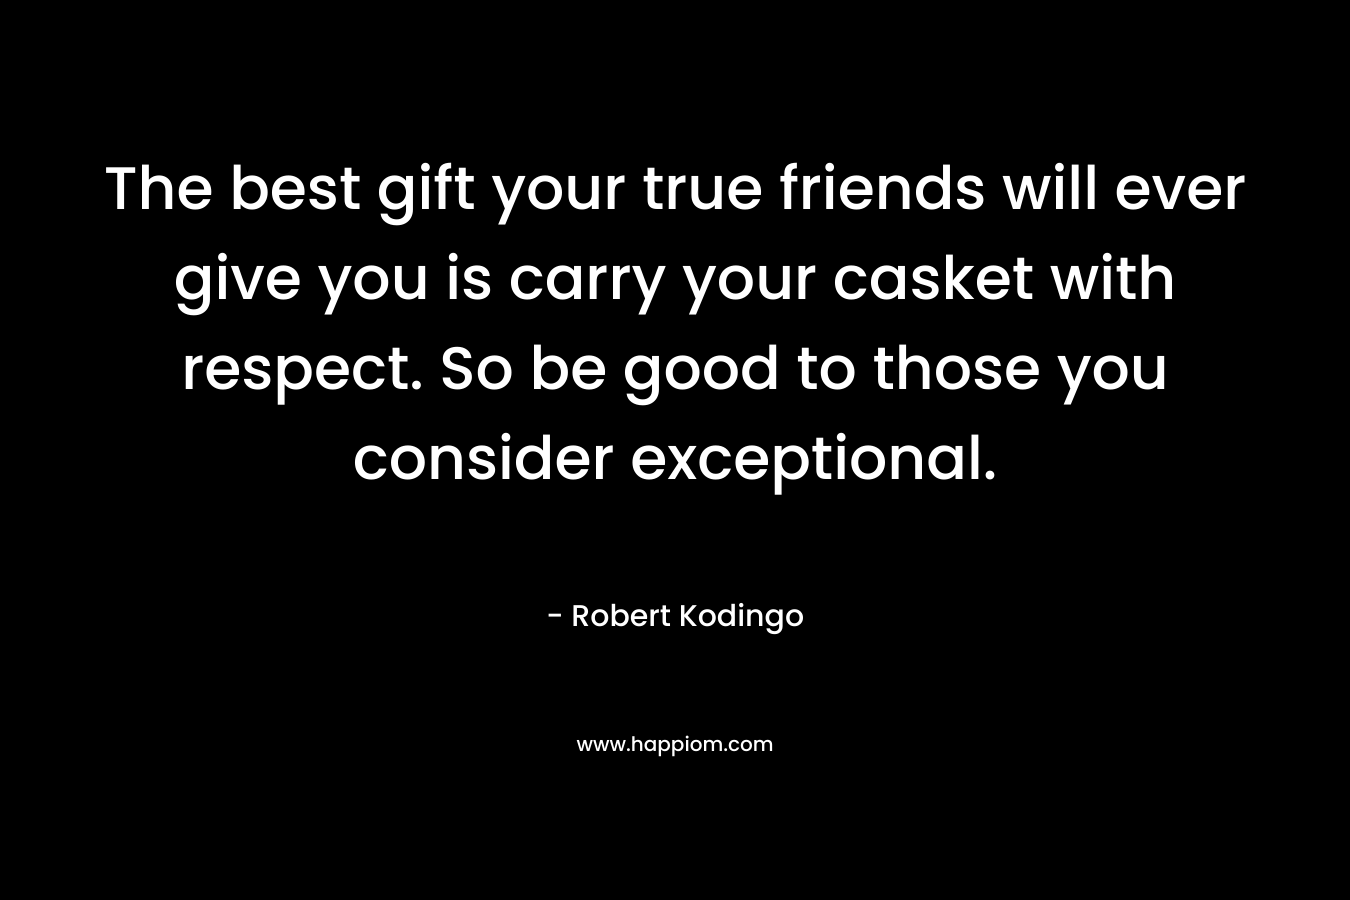 The best gift your true friends will ever give you is carry your casket with respect. So be good to those you consider exceptional.